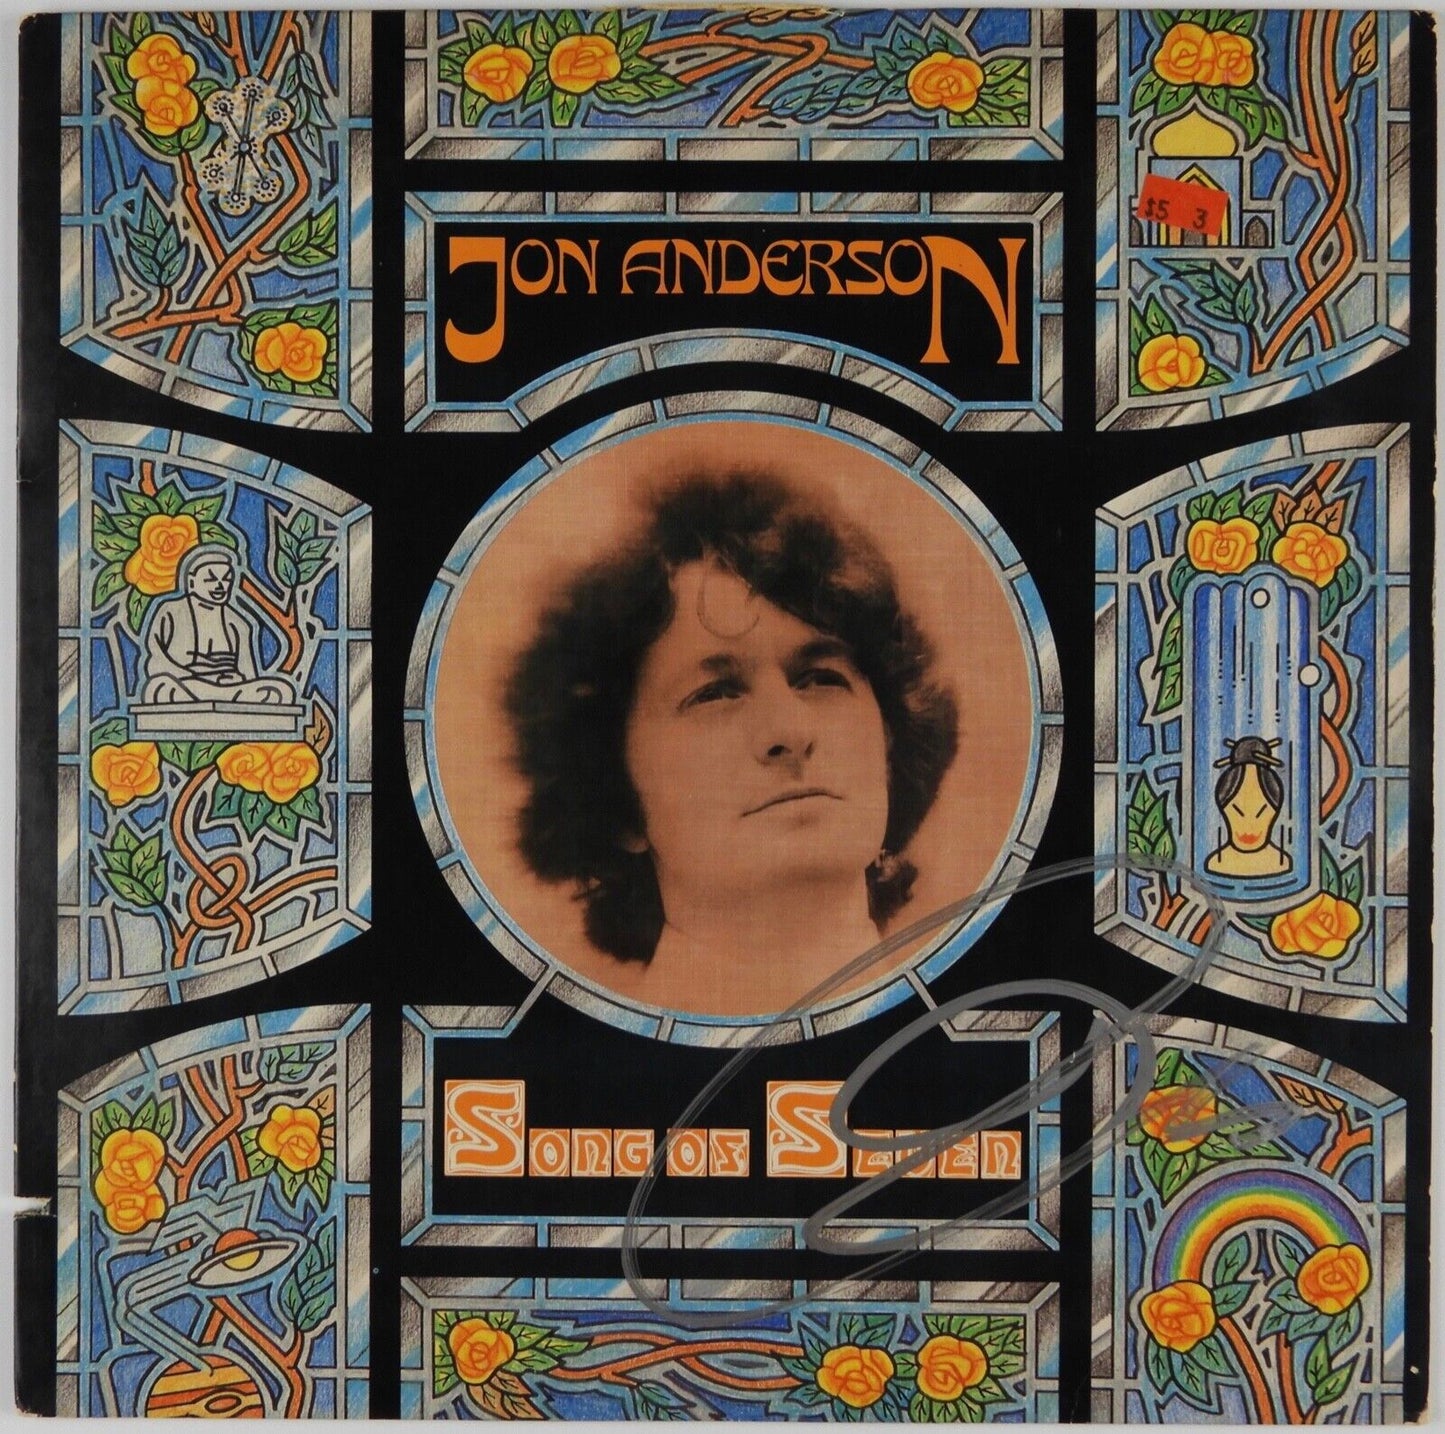 Jon Anderson YES JSA Signed Autograph Record Album Vinyl Songs Of Seven